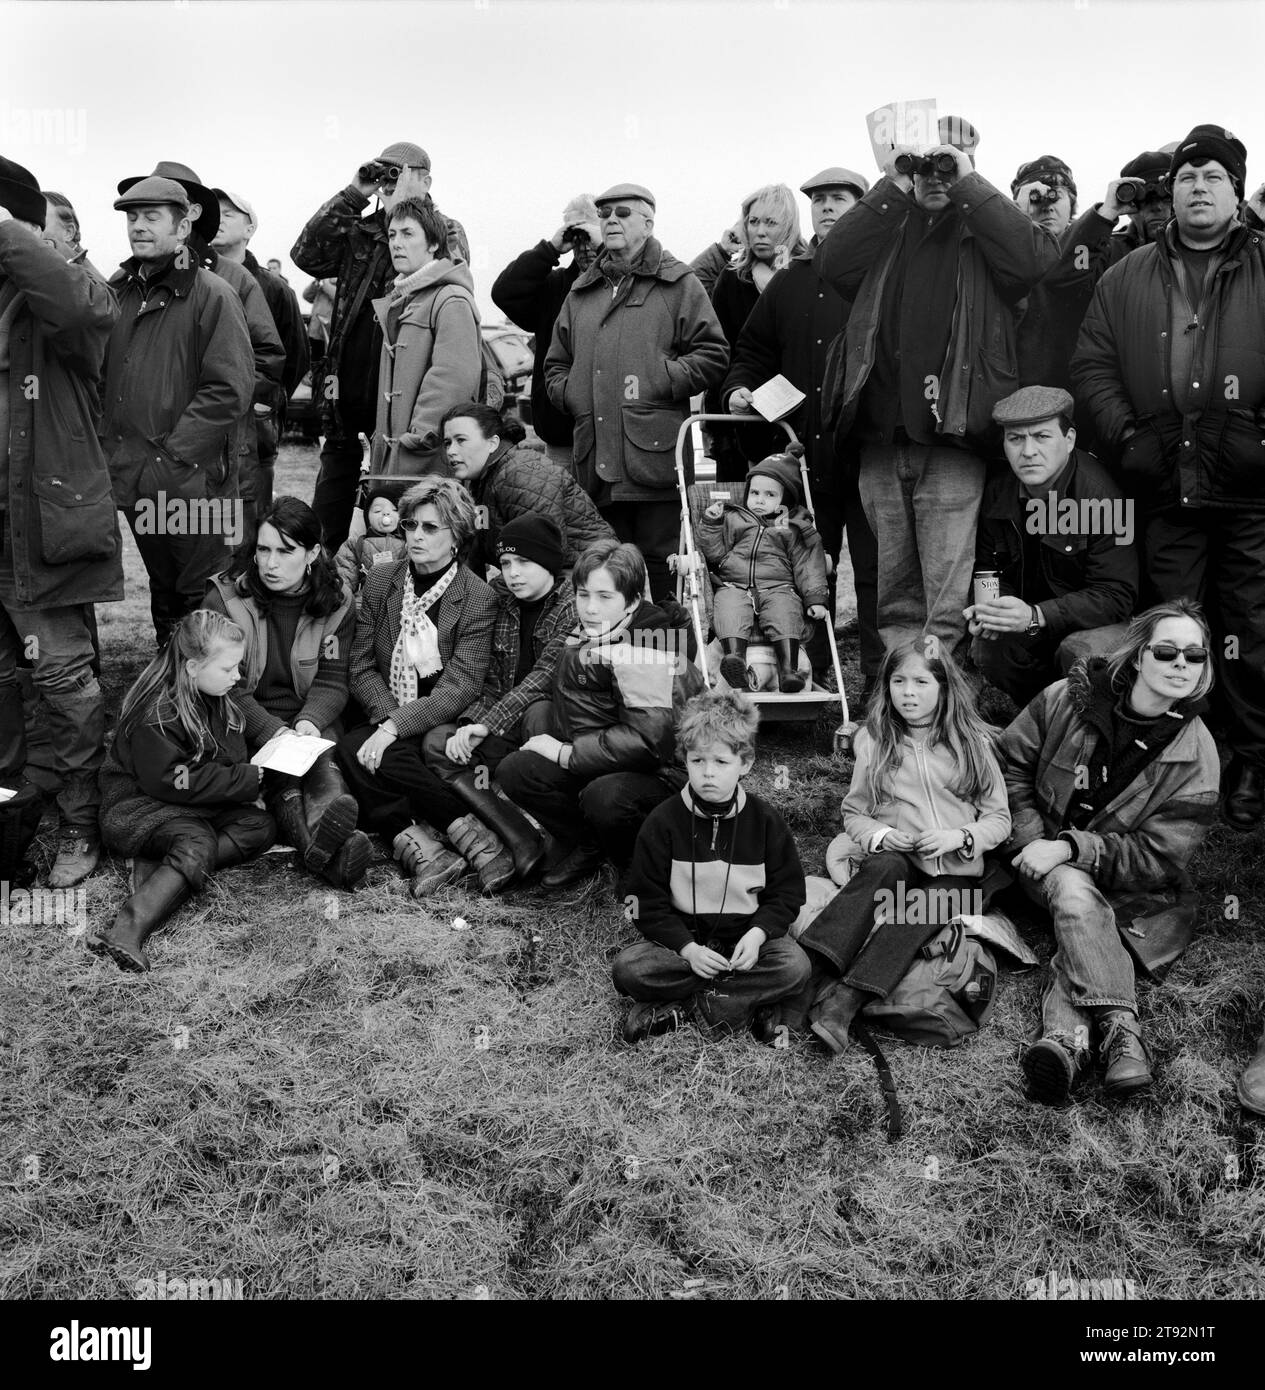 Hare Coursing. Spectators, family groups gather for a days coursing at the Waterloo Cup. They are watching the hare being chased on the 'running field'. Near Altcar, Lancashire, England 2002 2000s HOMER SYKES Stock Photo